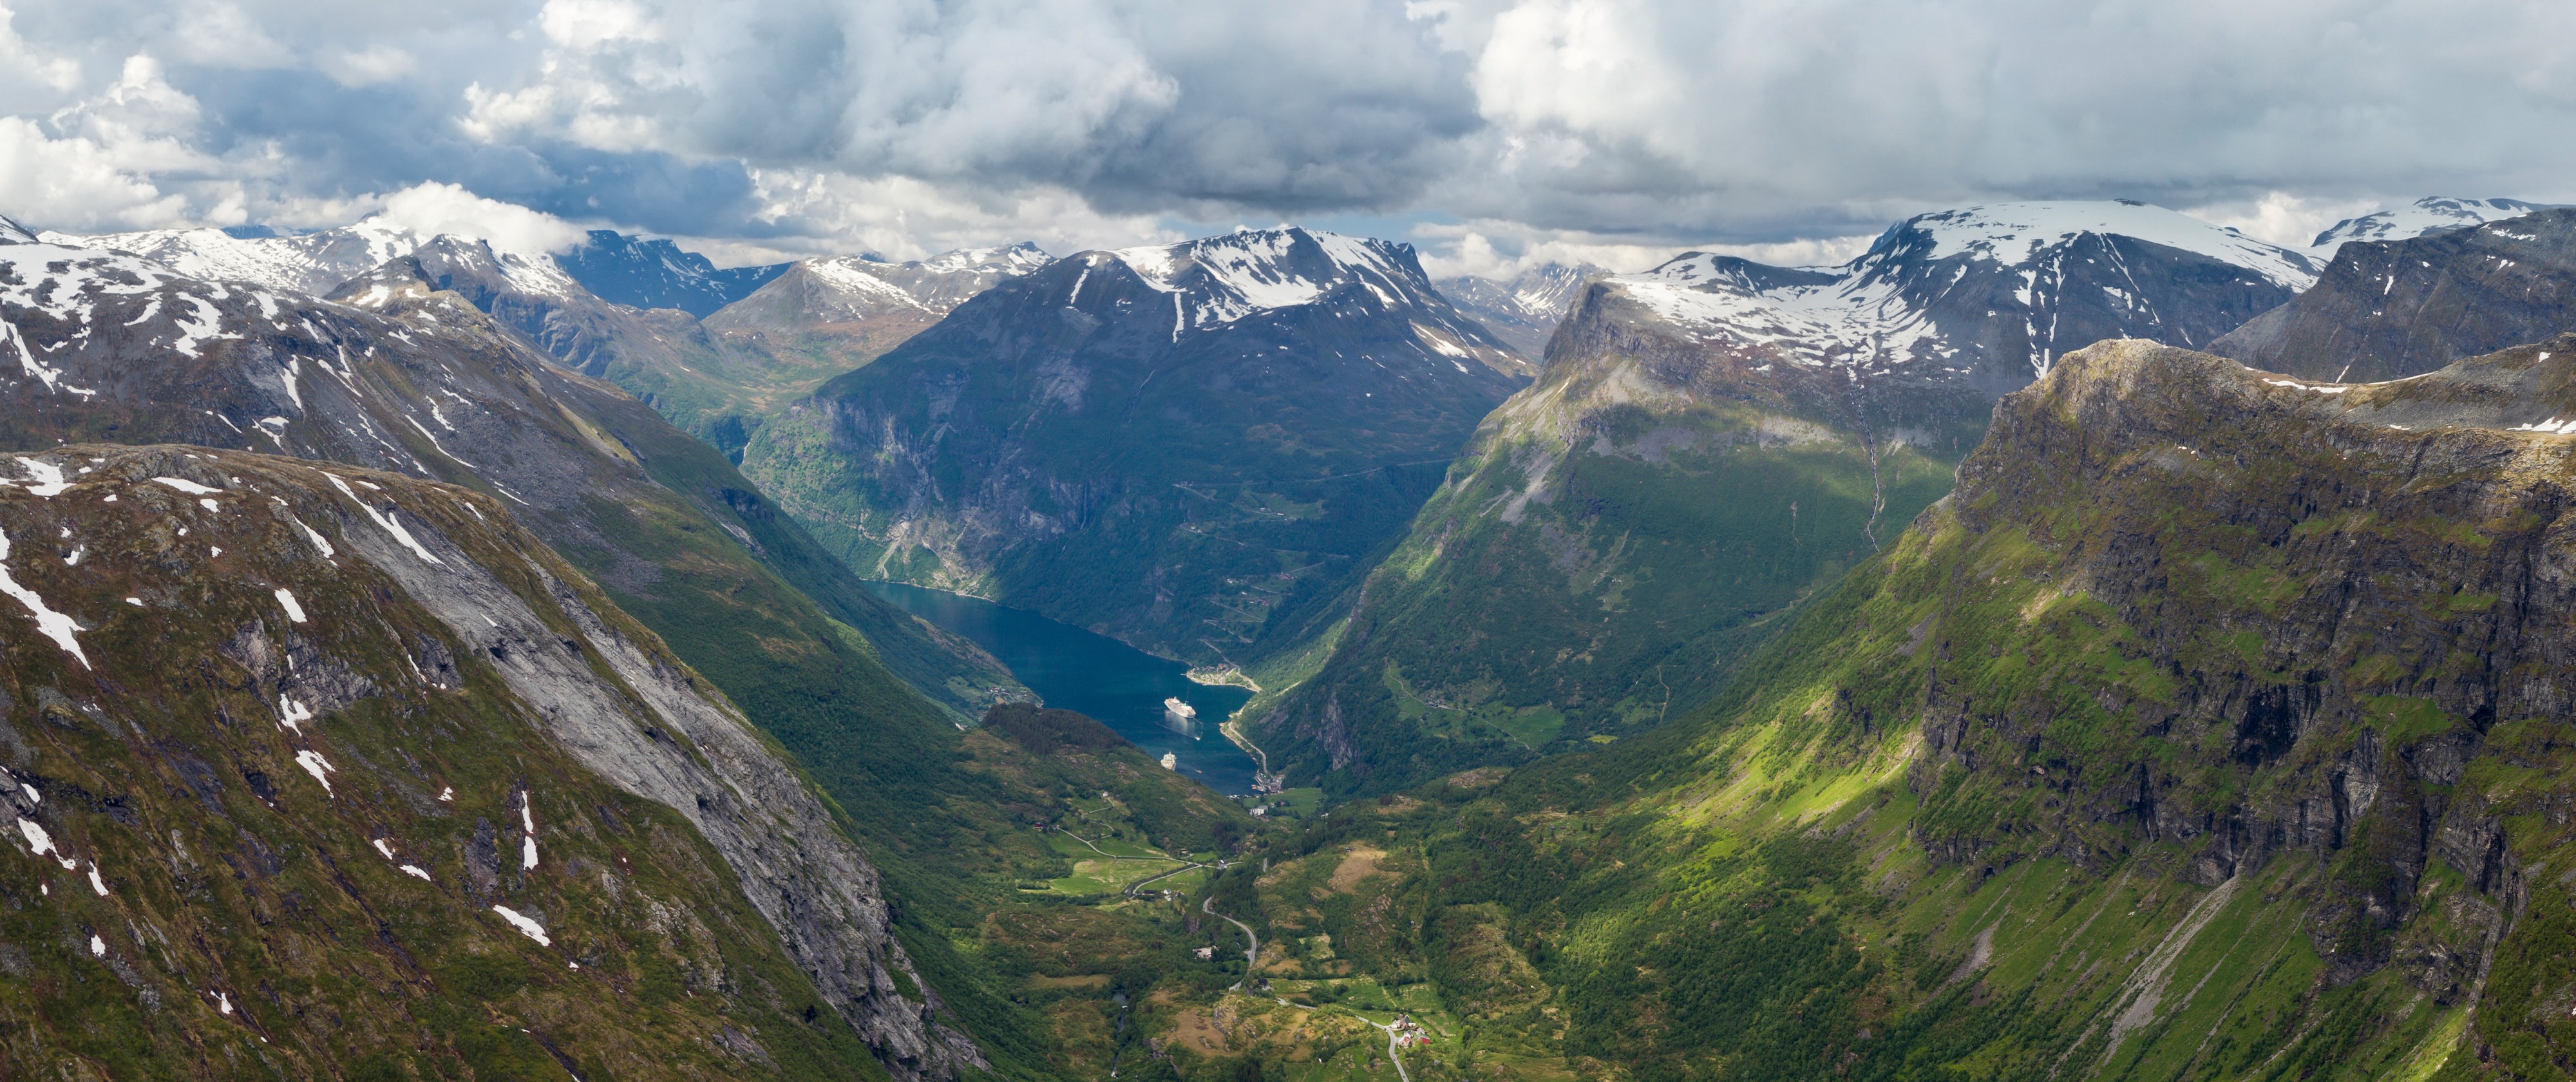 A view towards Geirangerfjord from Dalsnibba, Møre og Romsdal, Norway, 2013 June